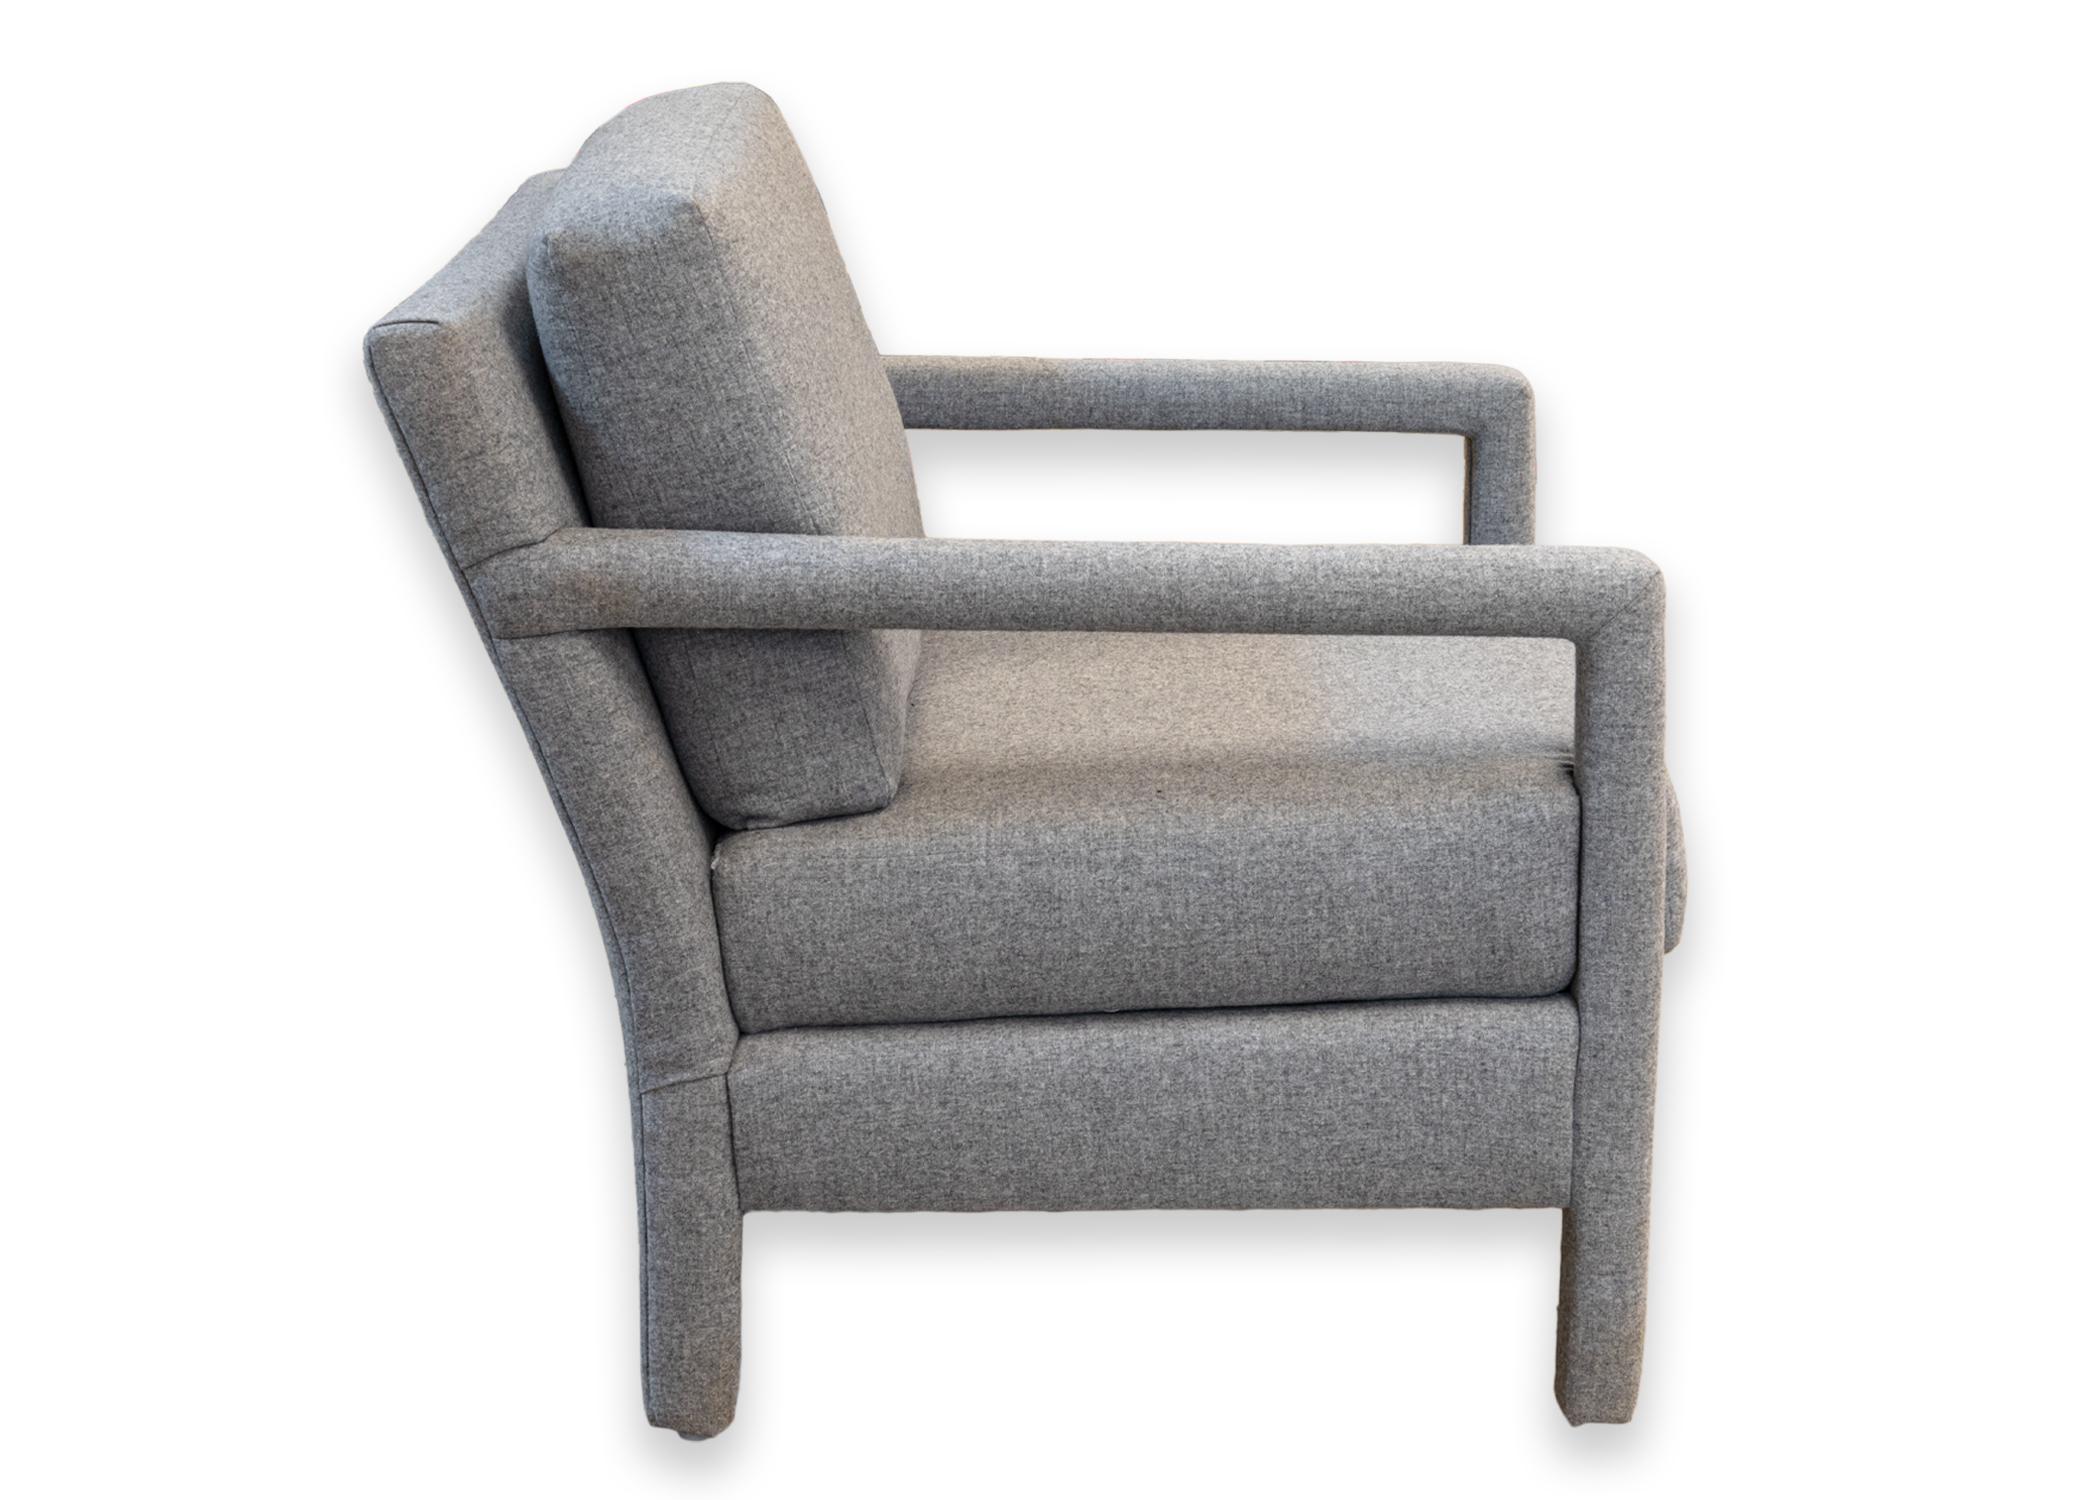 A Milo Baughman parsons accent chair. A beautiful upholstered accent chair with a head to toe grey/blue ultra soft fabric. This piece has removable cushions on the back and the seat. This piece is in very good condition. It measures 31 in tall, 27.5